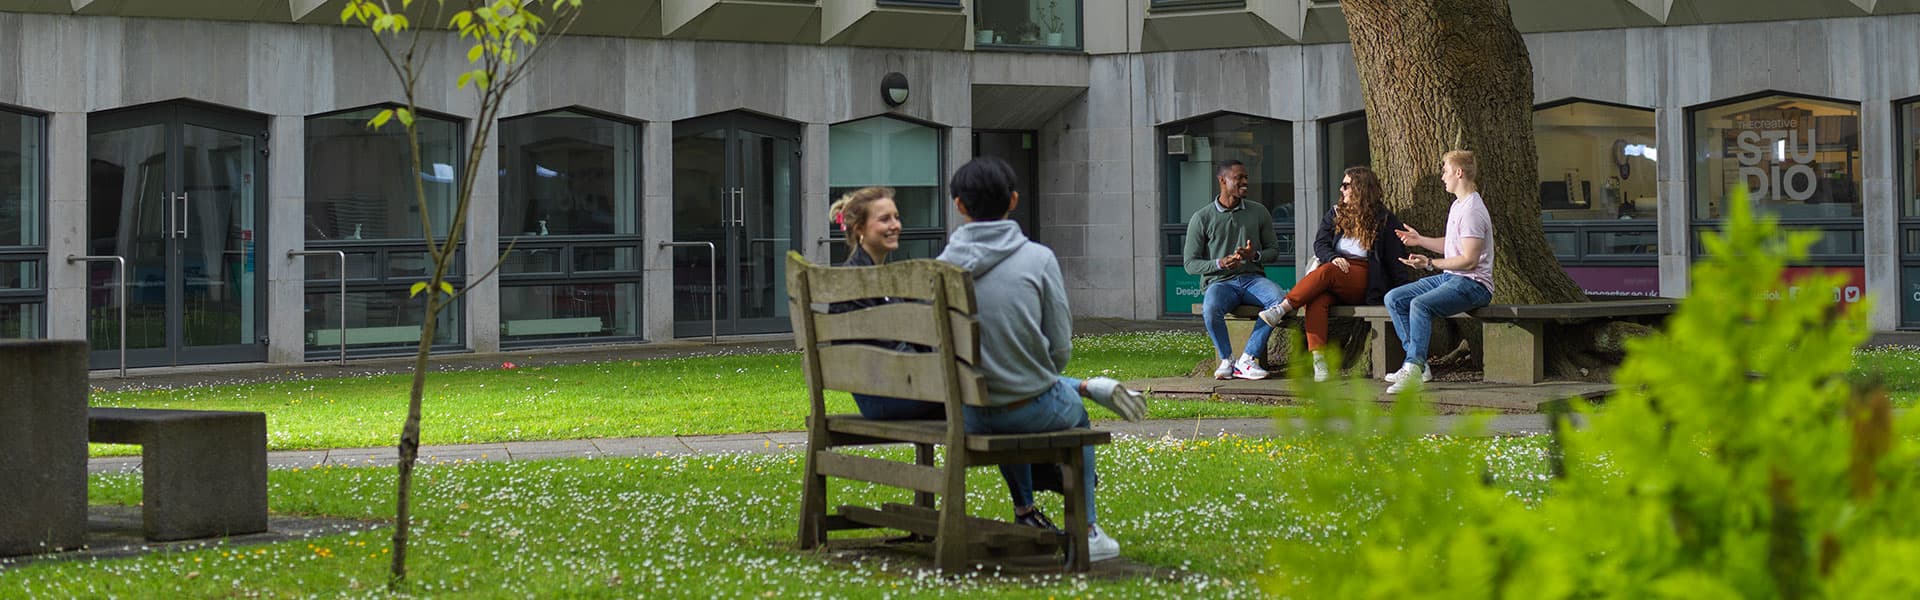 Students sit on benches in leafy gardens in summer